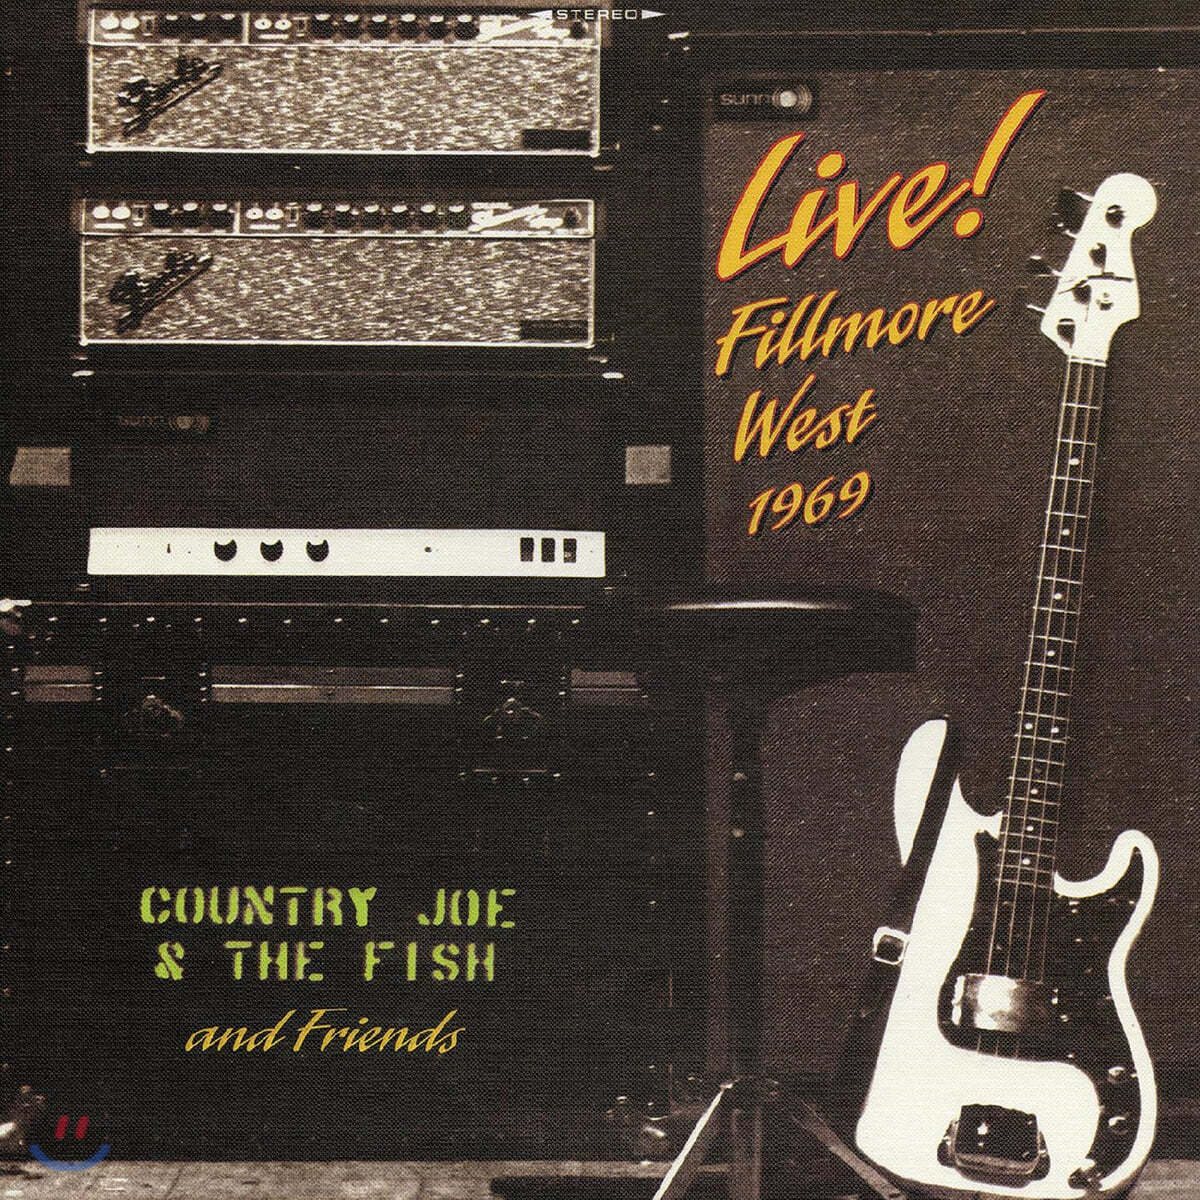 Country Joe &amp; The Fish and Friends - Live! Fillmore West 1969 (50th Anniversary) [옐로우 컬러 2LP]